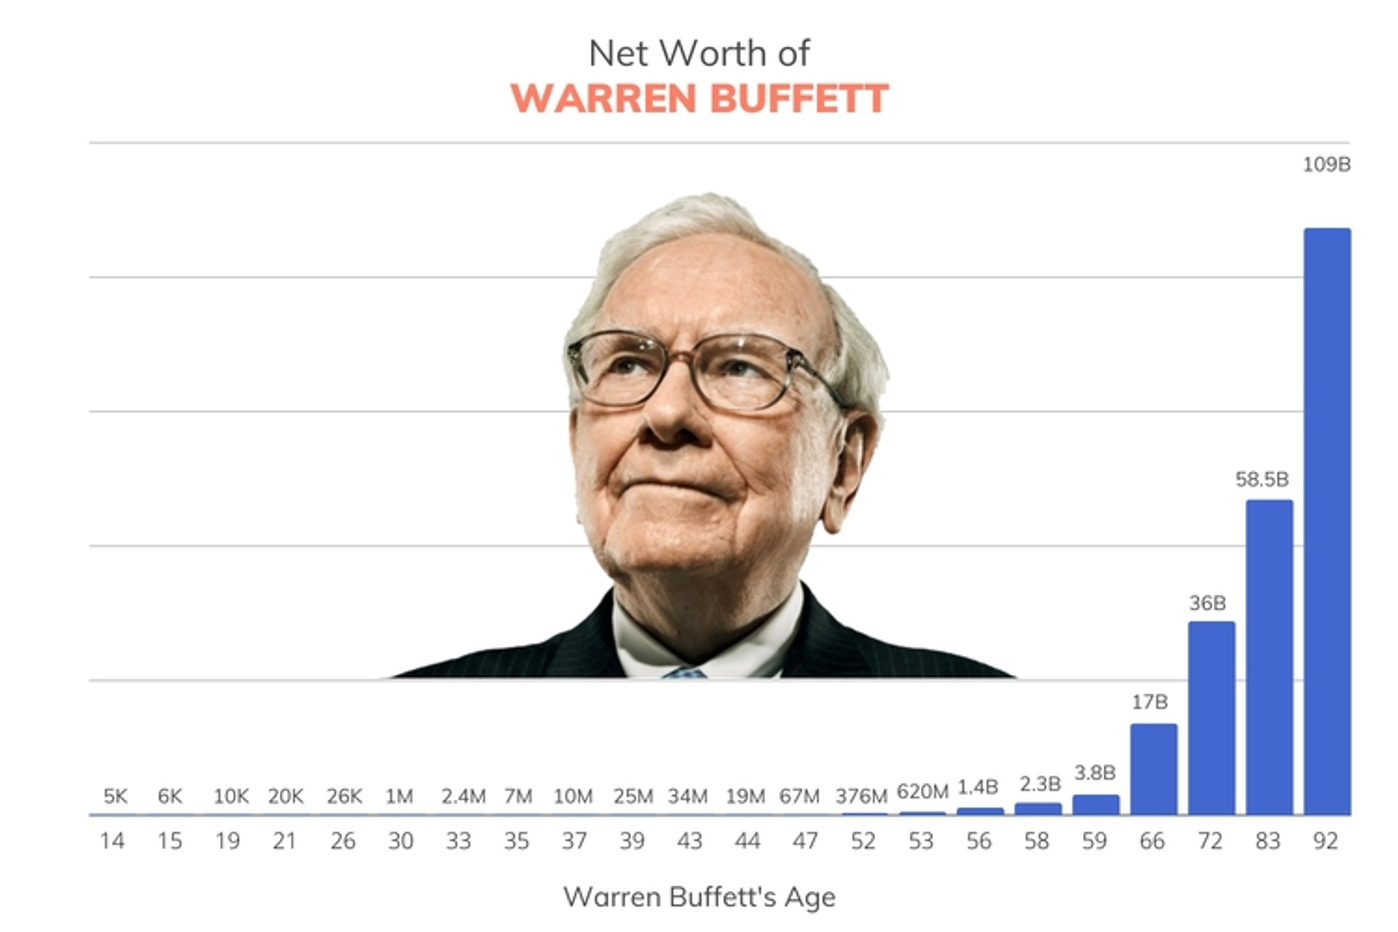 Source: <a href="https://finmasters.com/warren-buffett-net-worth/#gref">Warren Buffett's Net Worth Over the Years</a>